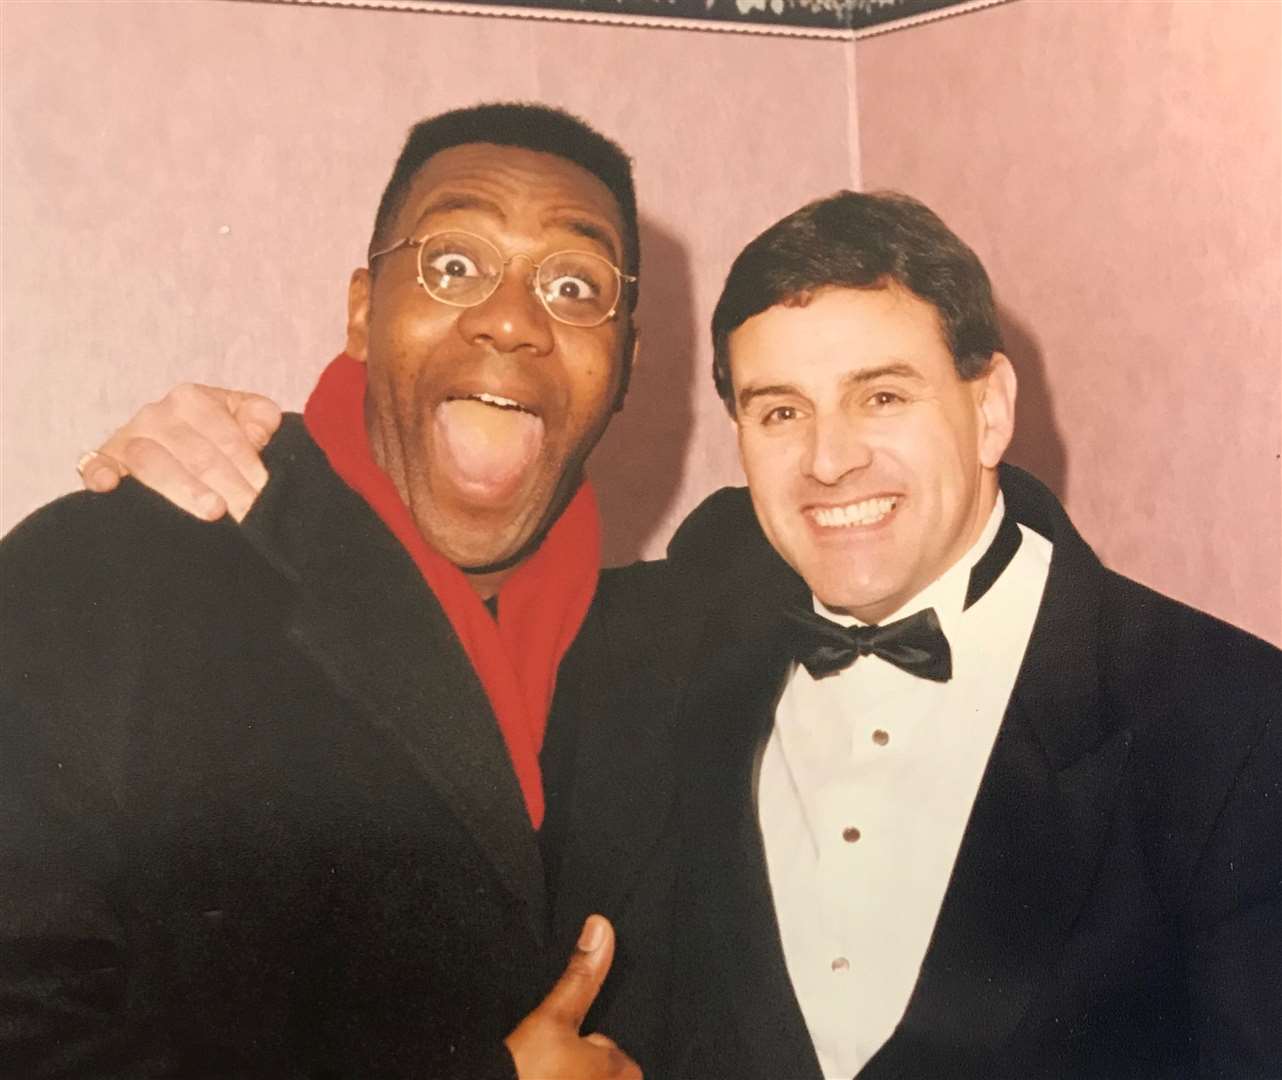 Ray with Lenny Henry